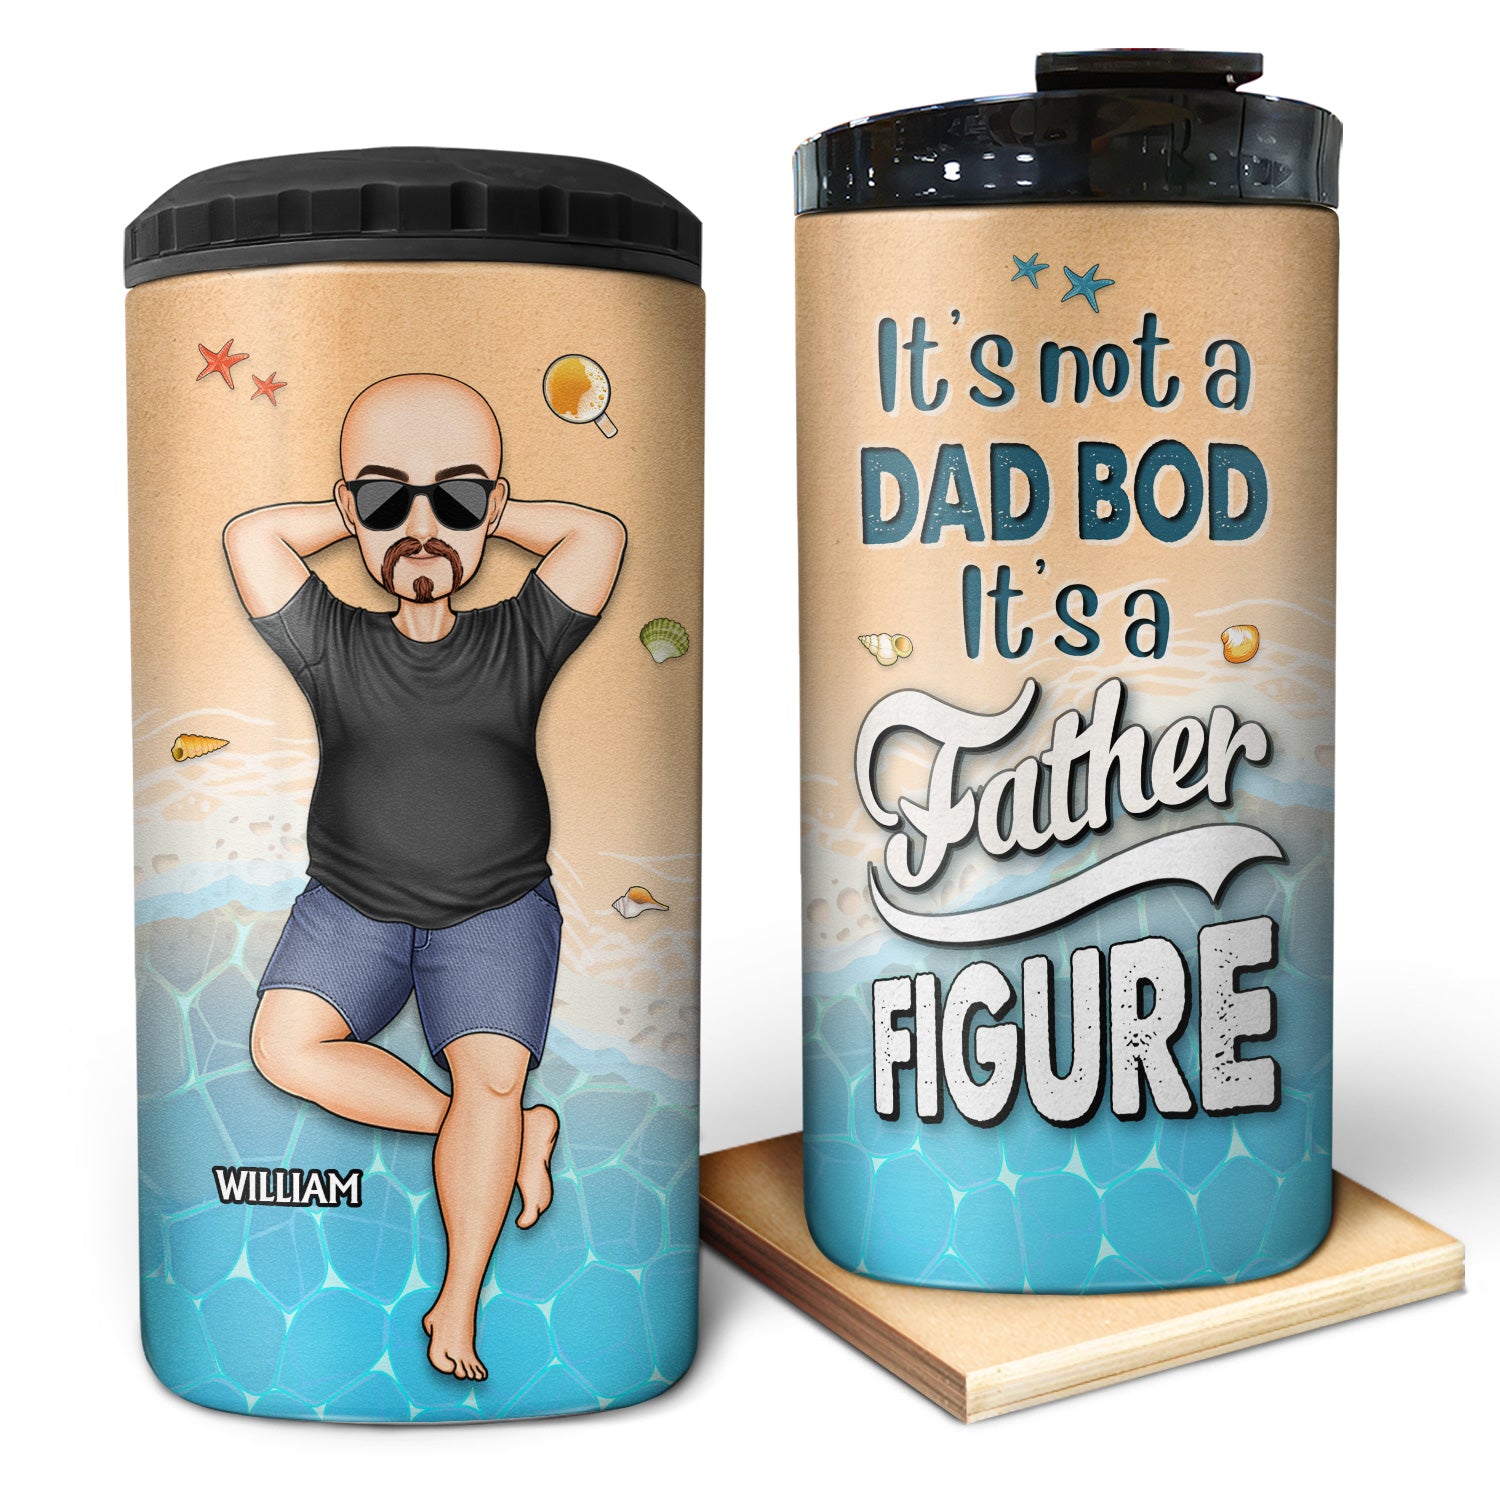 It's Not A Dad Bod It's A Father Figure - Birthday, Loving, Decor Gift For Dad, Father, Grandpa, Grandfather - Personalized Custom 4 In 1 Can Cooler Tumbler